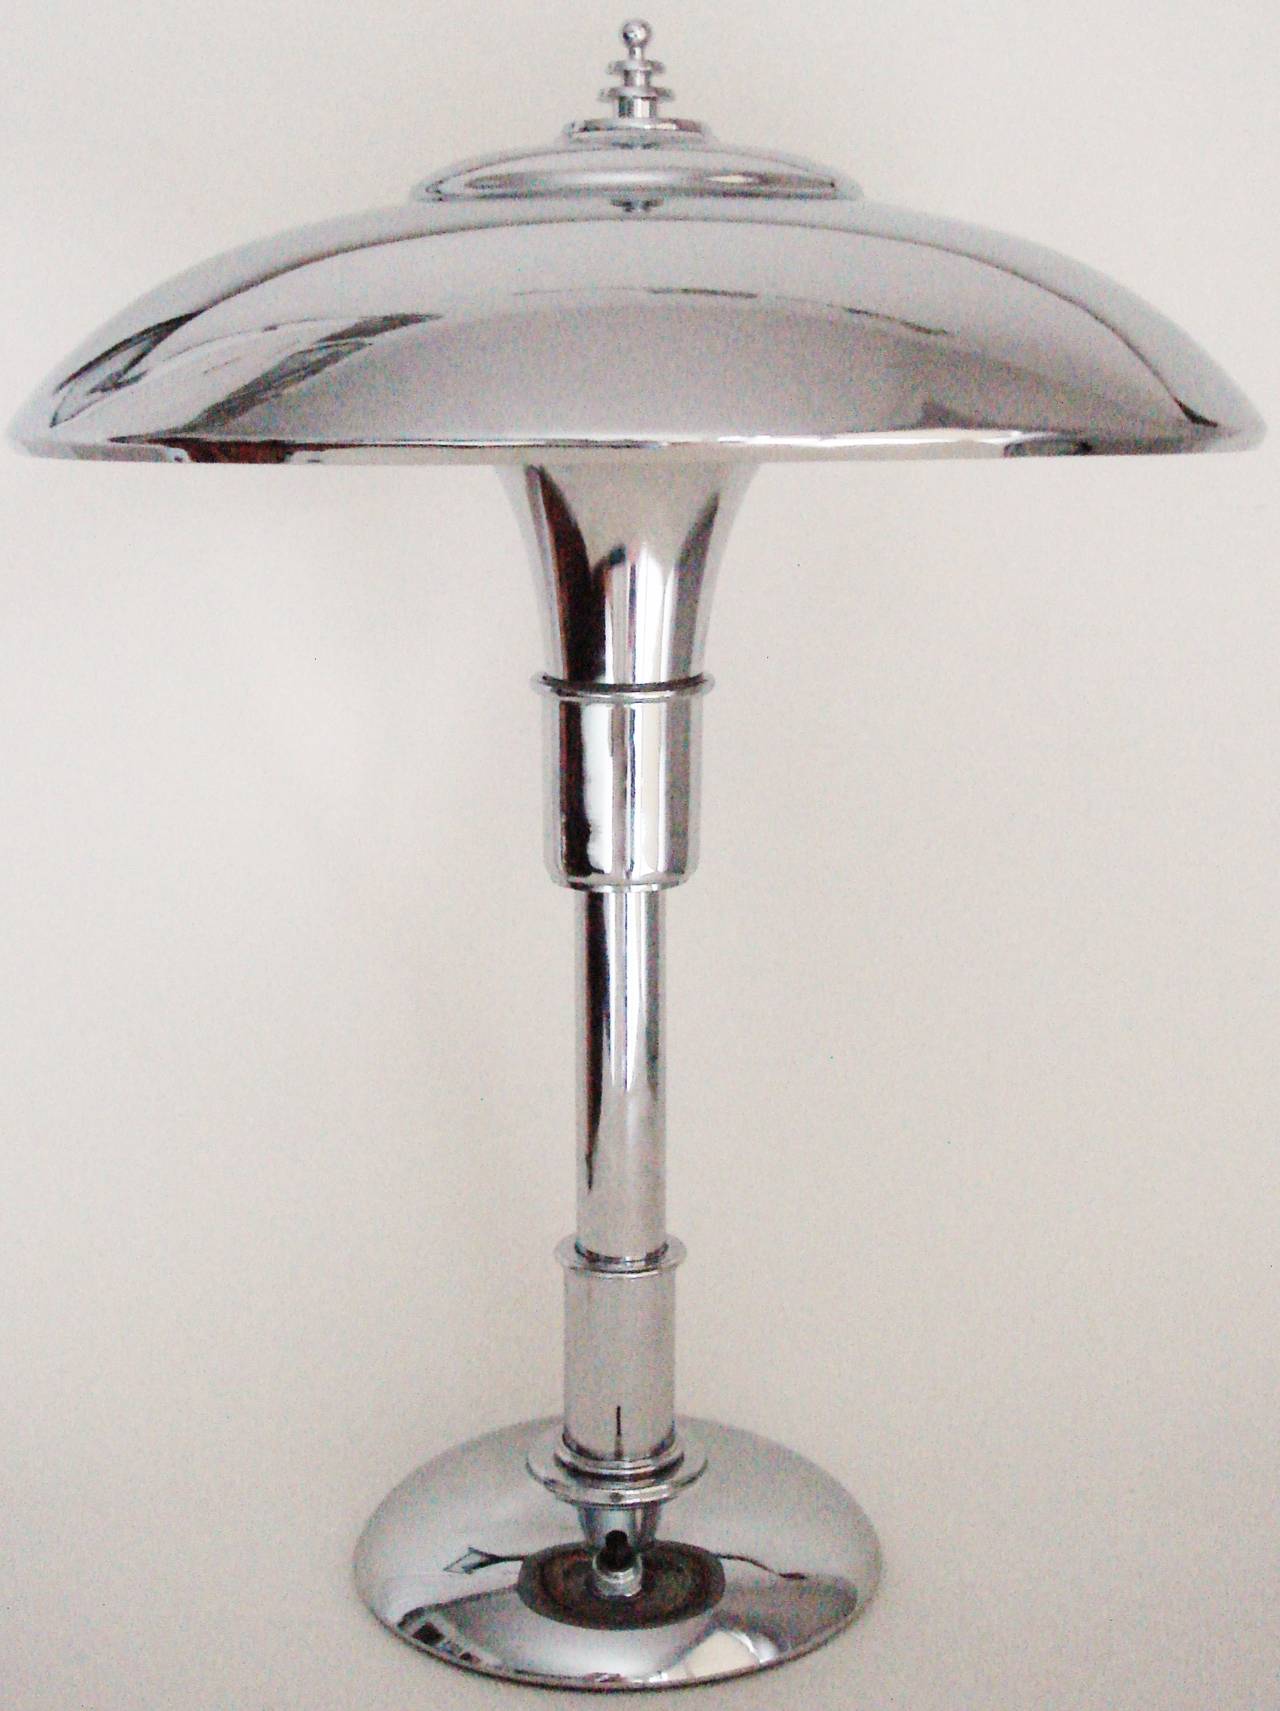 These three beautifully restored and rewired American Art Deco chrome plated iconic Guardsman Junior table lamps were designed in 1936. The prolific designer, Bert  A. Dickerson was awarded a patent for the design (D104 094) the following year and